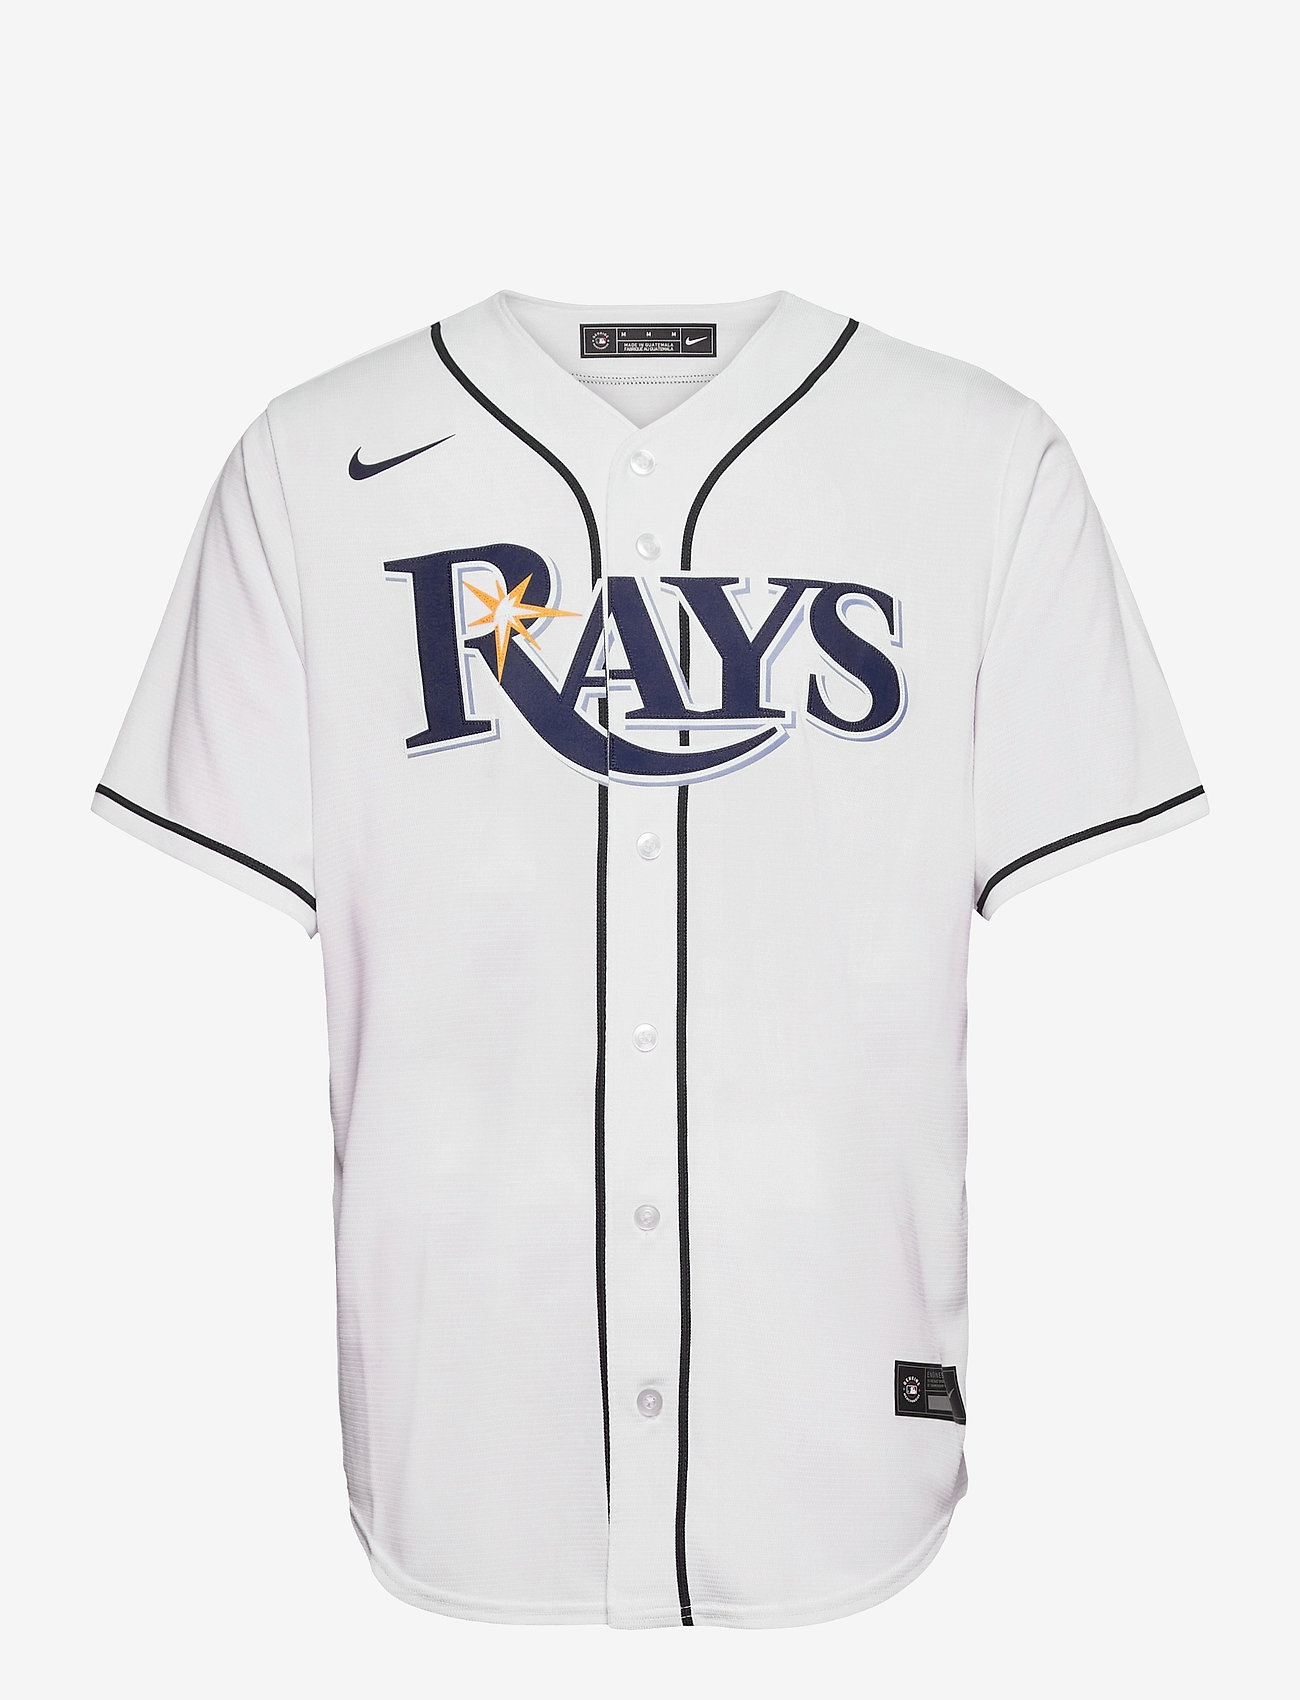 Tampa Bay Rays Nike Official Replica Home Jersey (White) (83.93